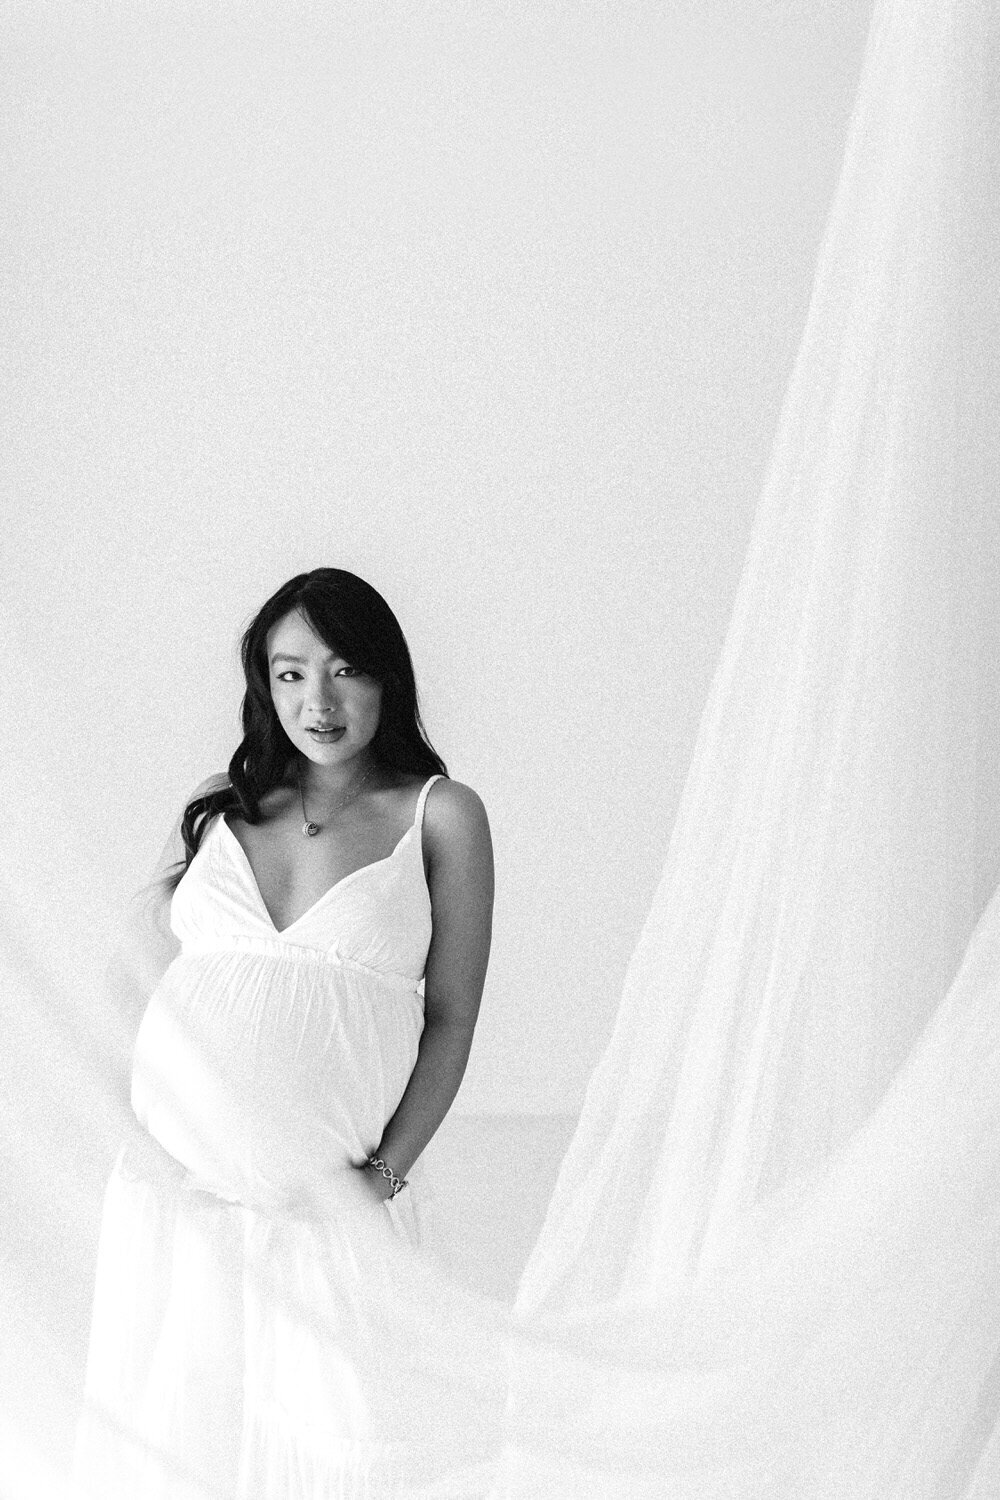 Asian woman who is pregnant stands next to white netting, wearing a white dress and looks at the camera